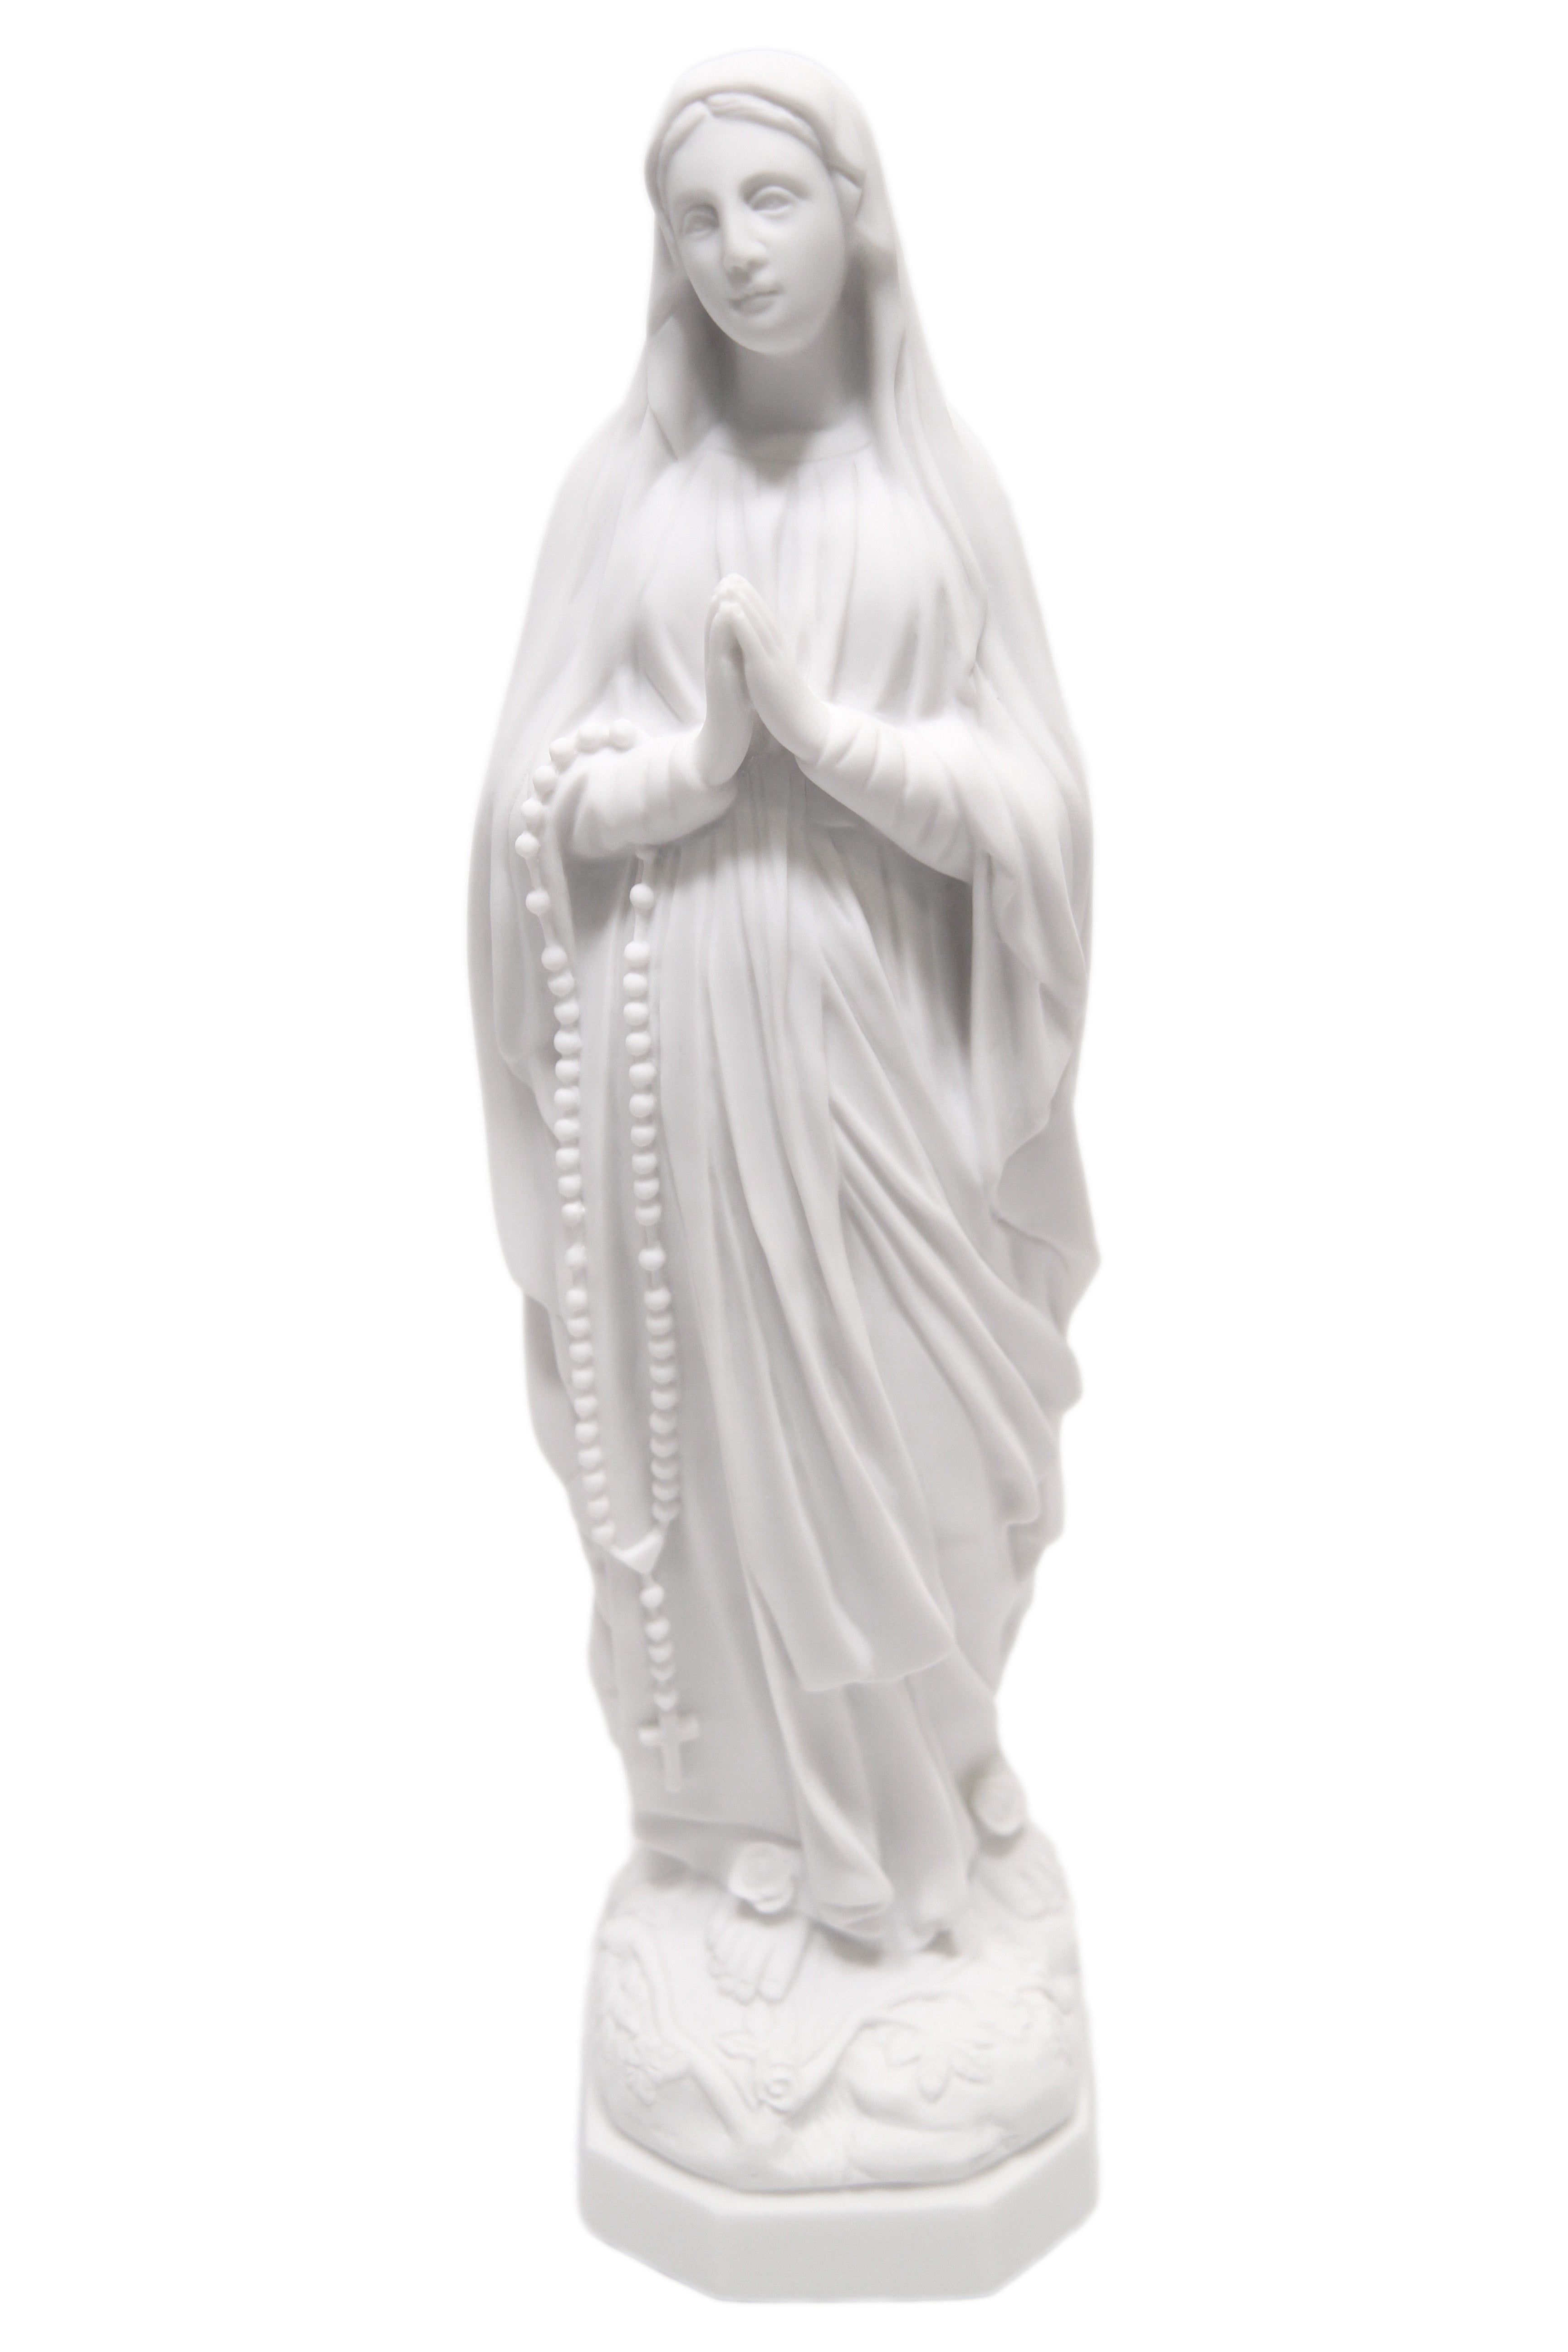 16 Inch Our Lady of Lourdes Virgin Mary Catholic Statue Vittoria Collection Made in Italy